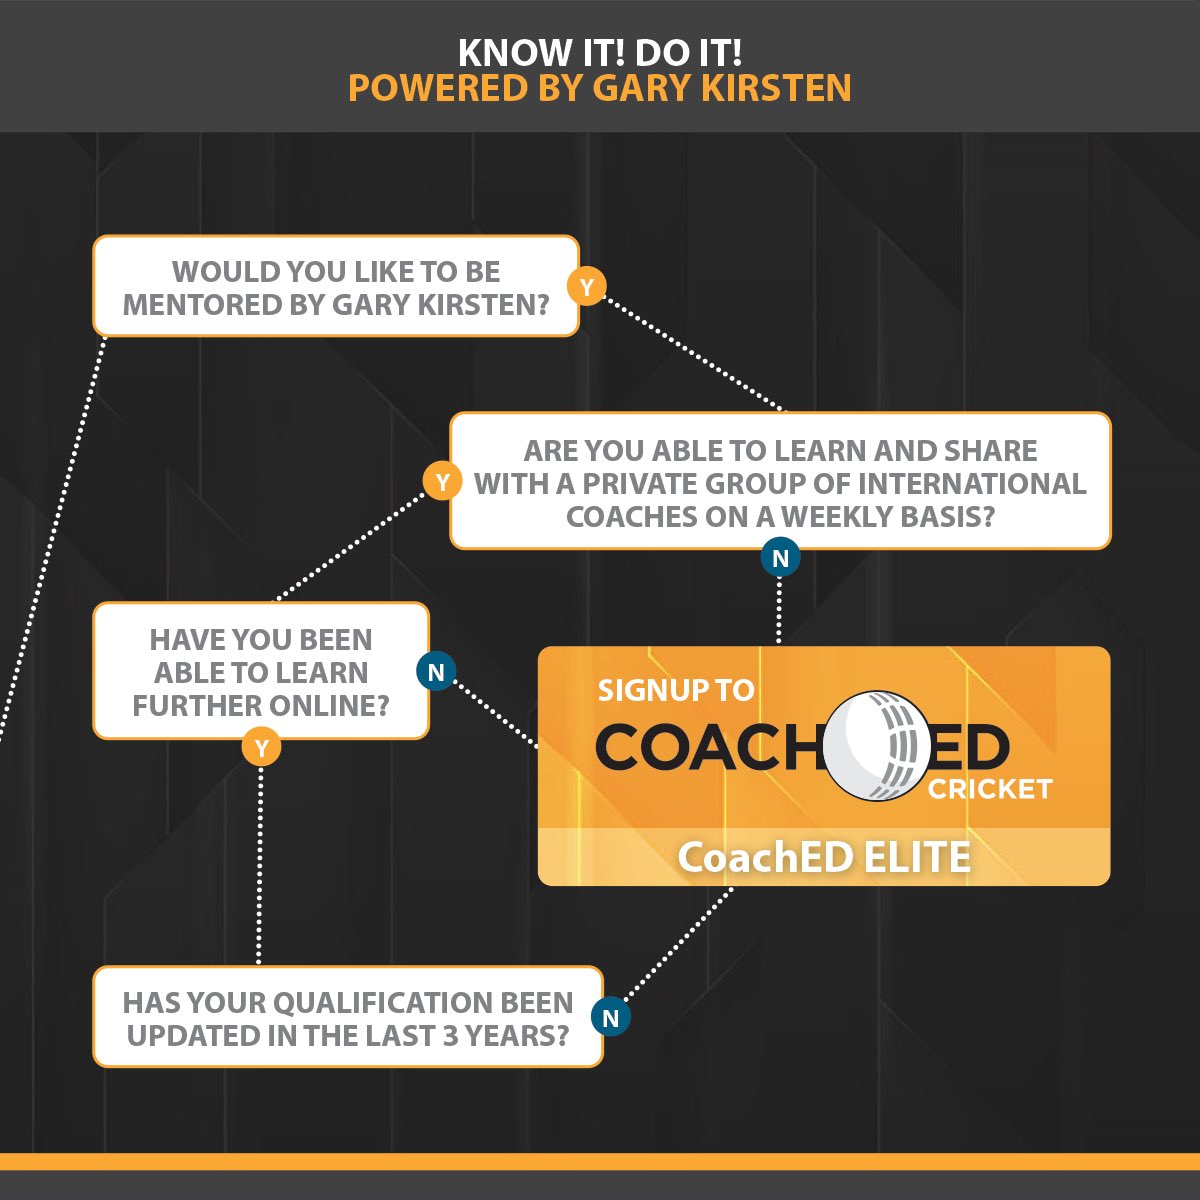 👉 Where do you fit in? 
.
👉 Click here coachedcricket.com once you find the answer 🙌
.
.
.
#coaching #coachingcourses #cricket #cricketexplained #crickettraining #coachingcourse #cricketeducation #coachingeducation